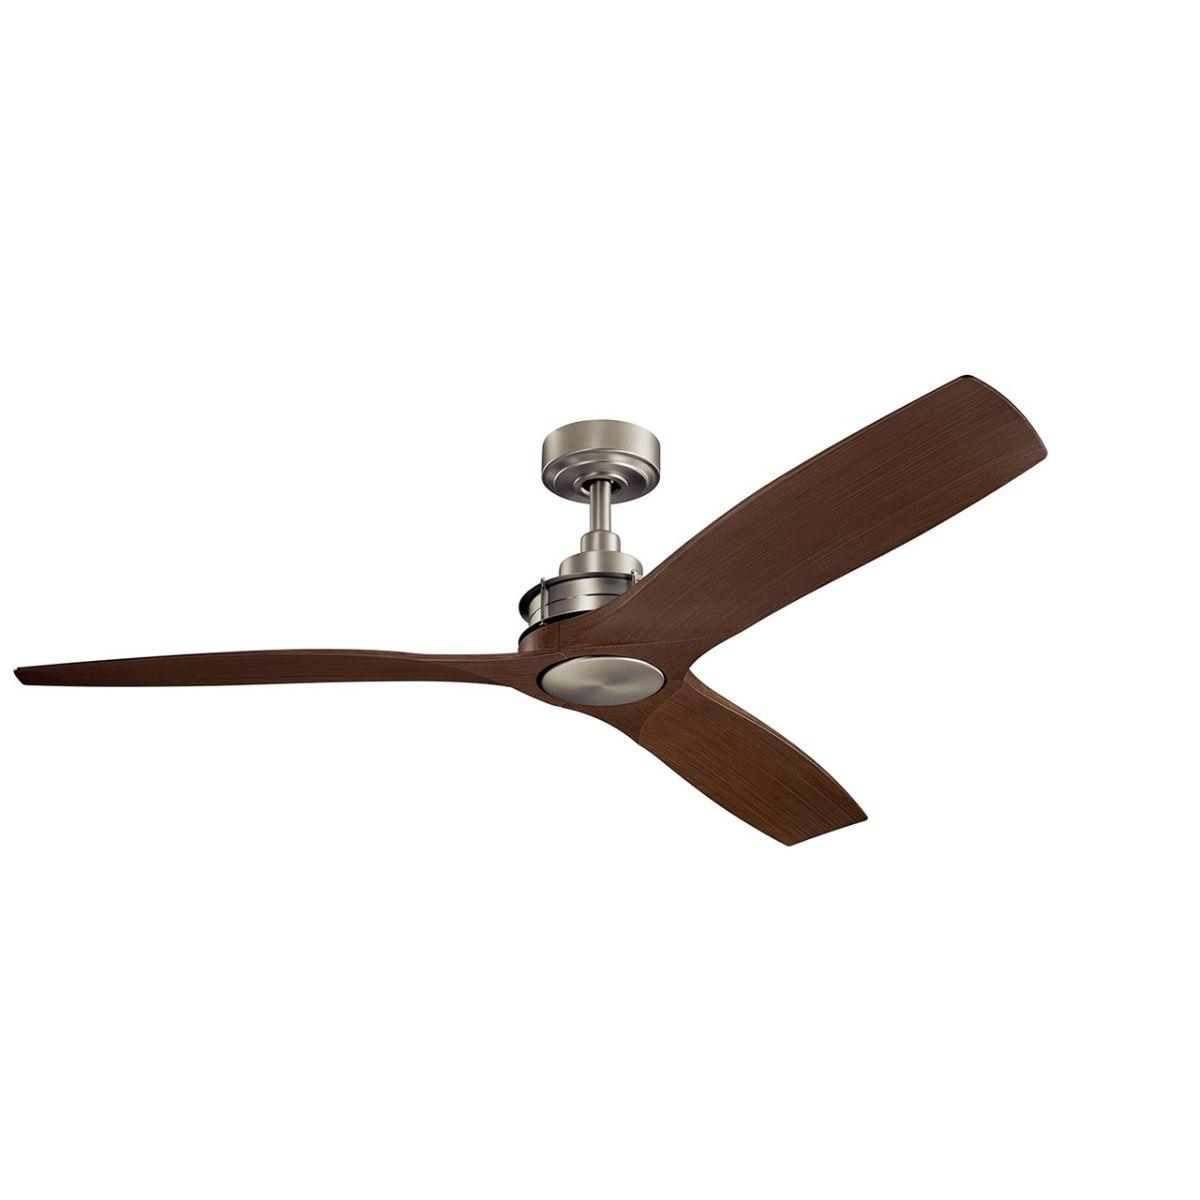 Ried 56 Inch Propeller Outdoor Ceiling Fan With Wall Control